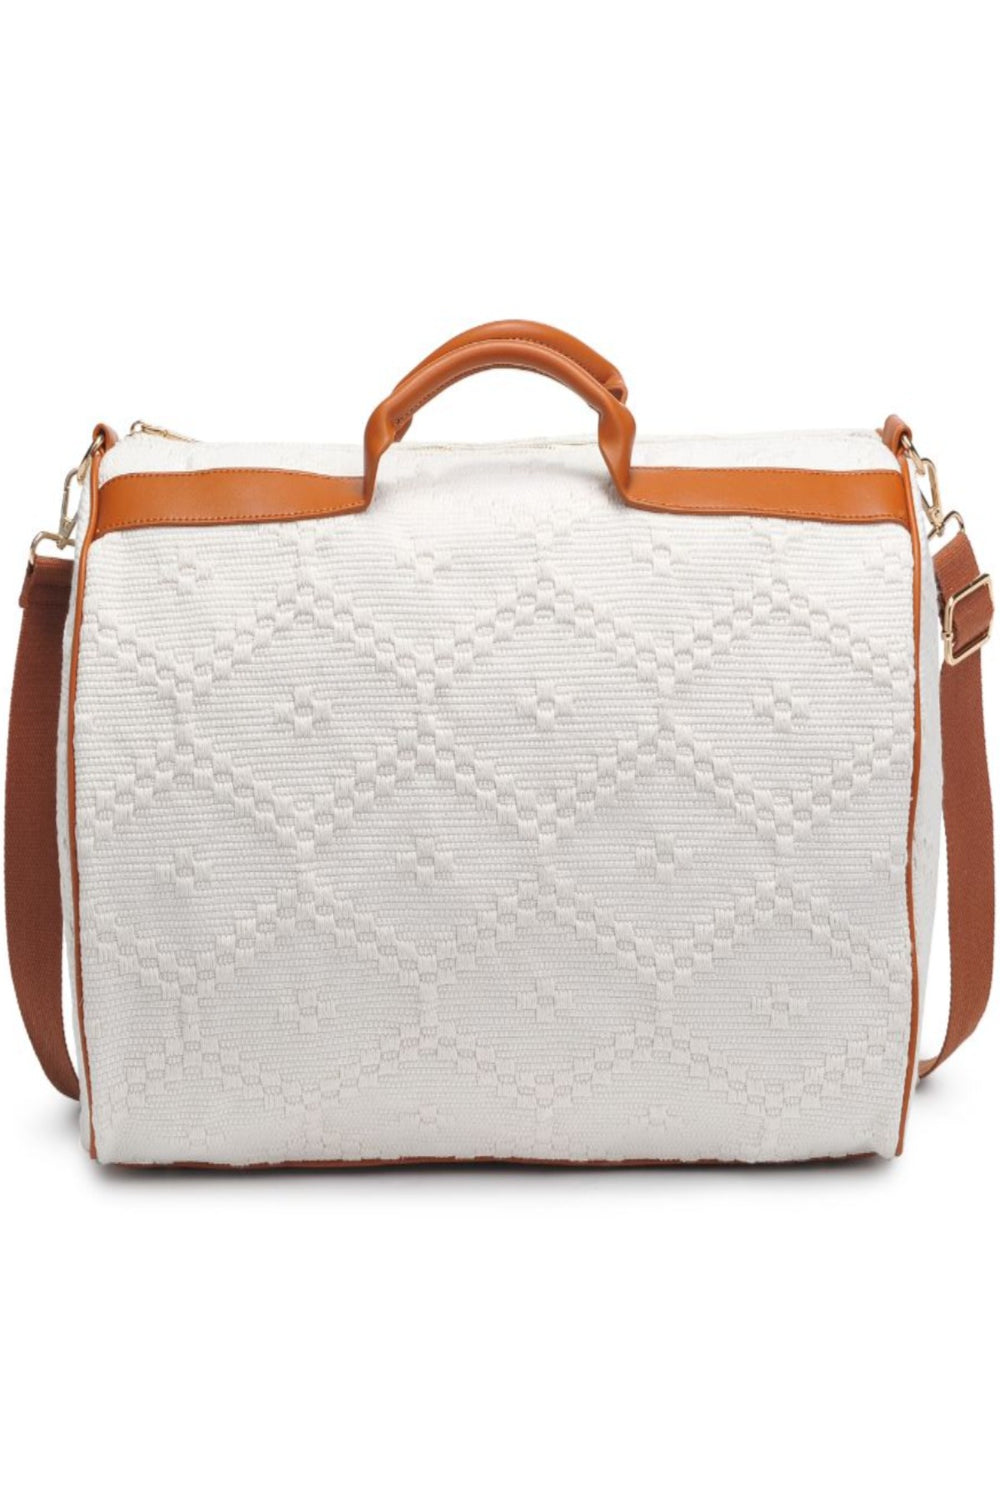 URBAN EXPRESSIONS WINSLOW WEEKENDER - IVORY TAN